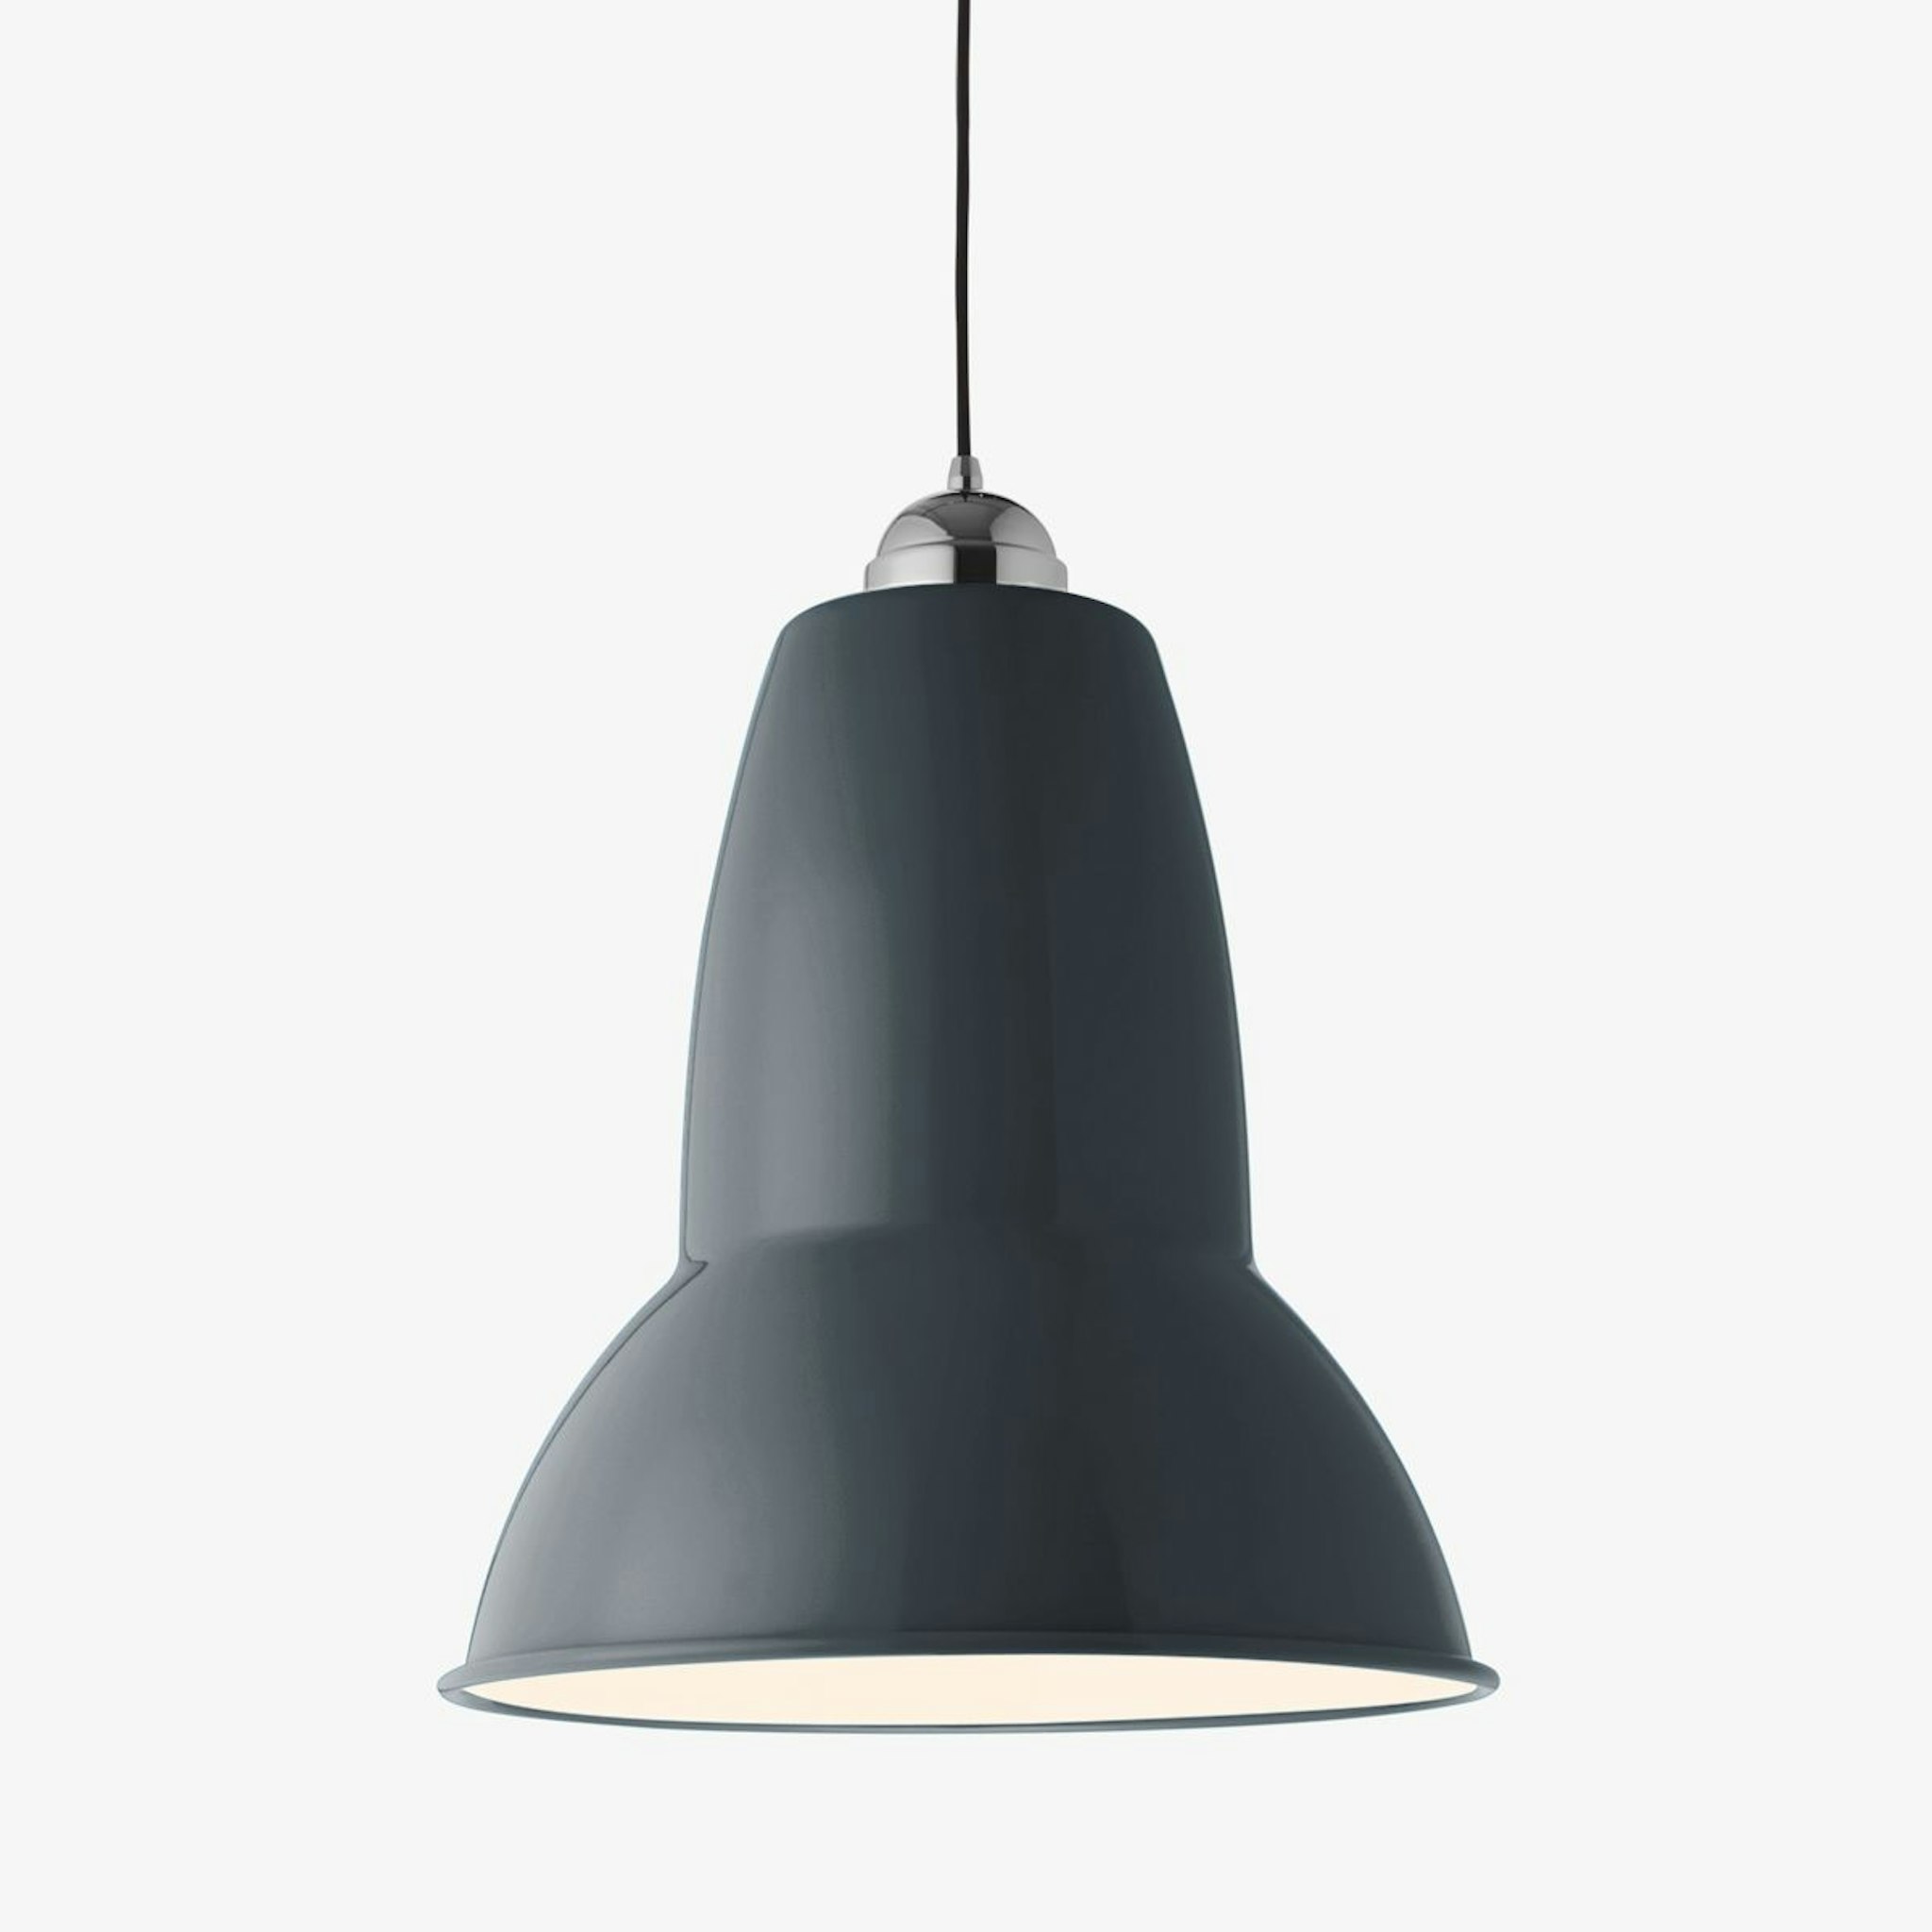 Original 1227 Giant Pendant by Anglepoise